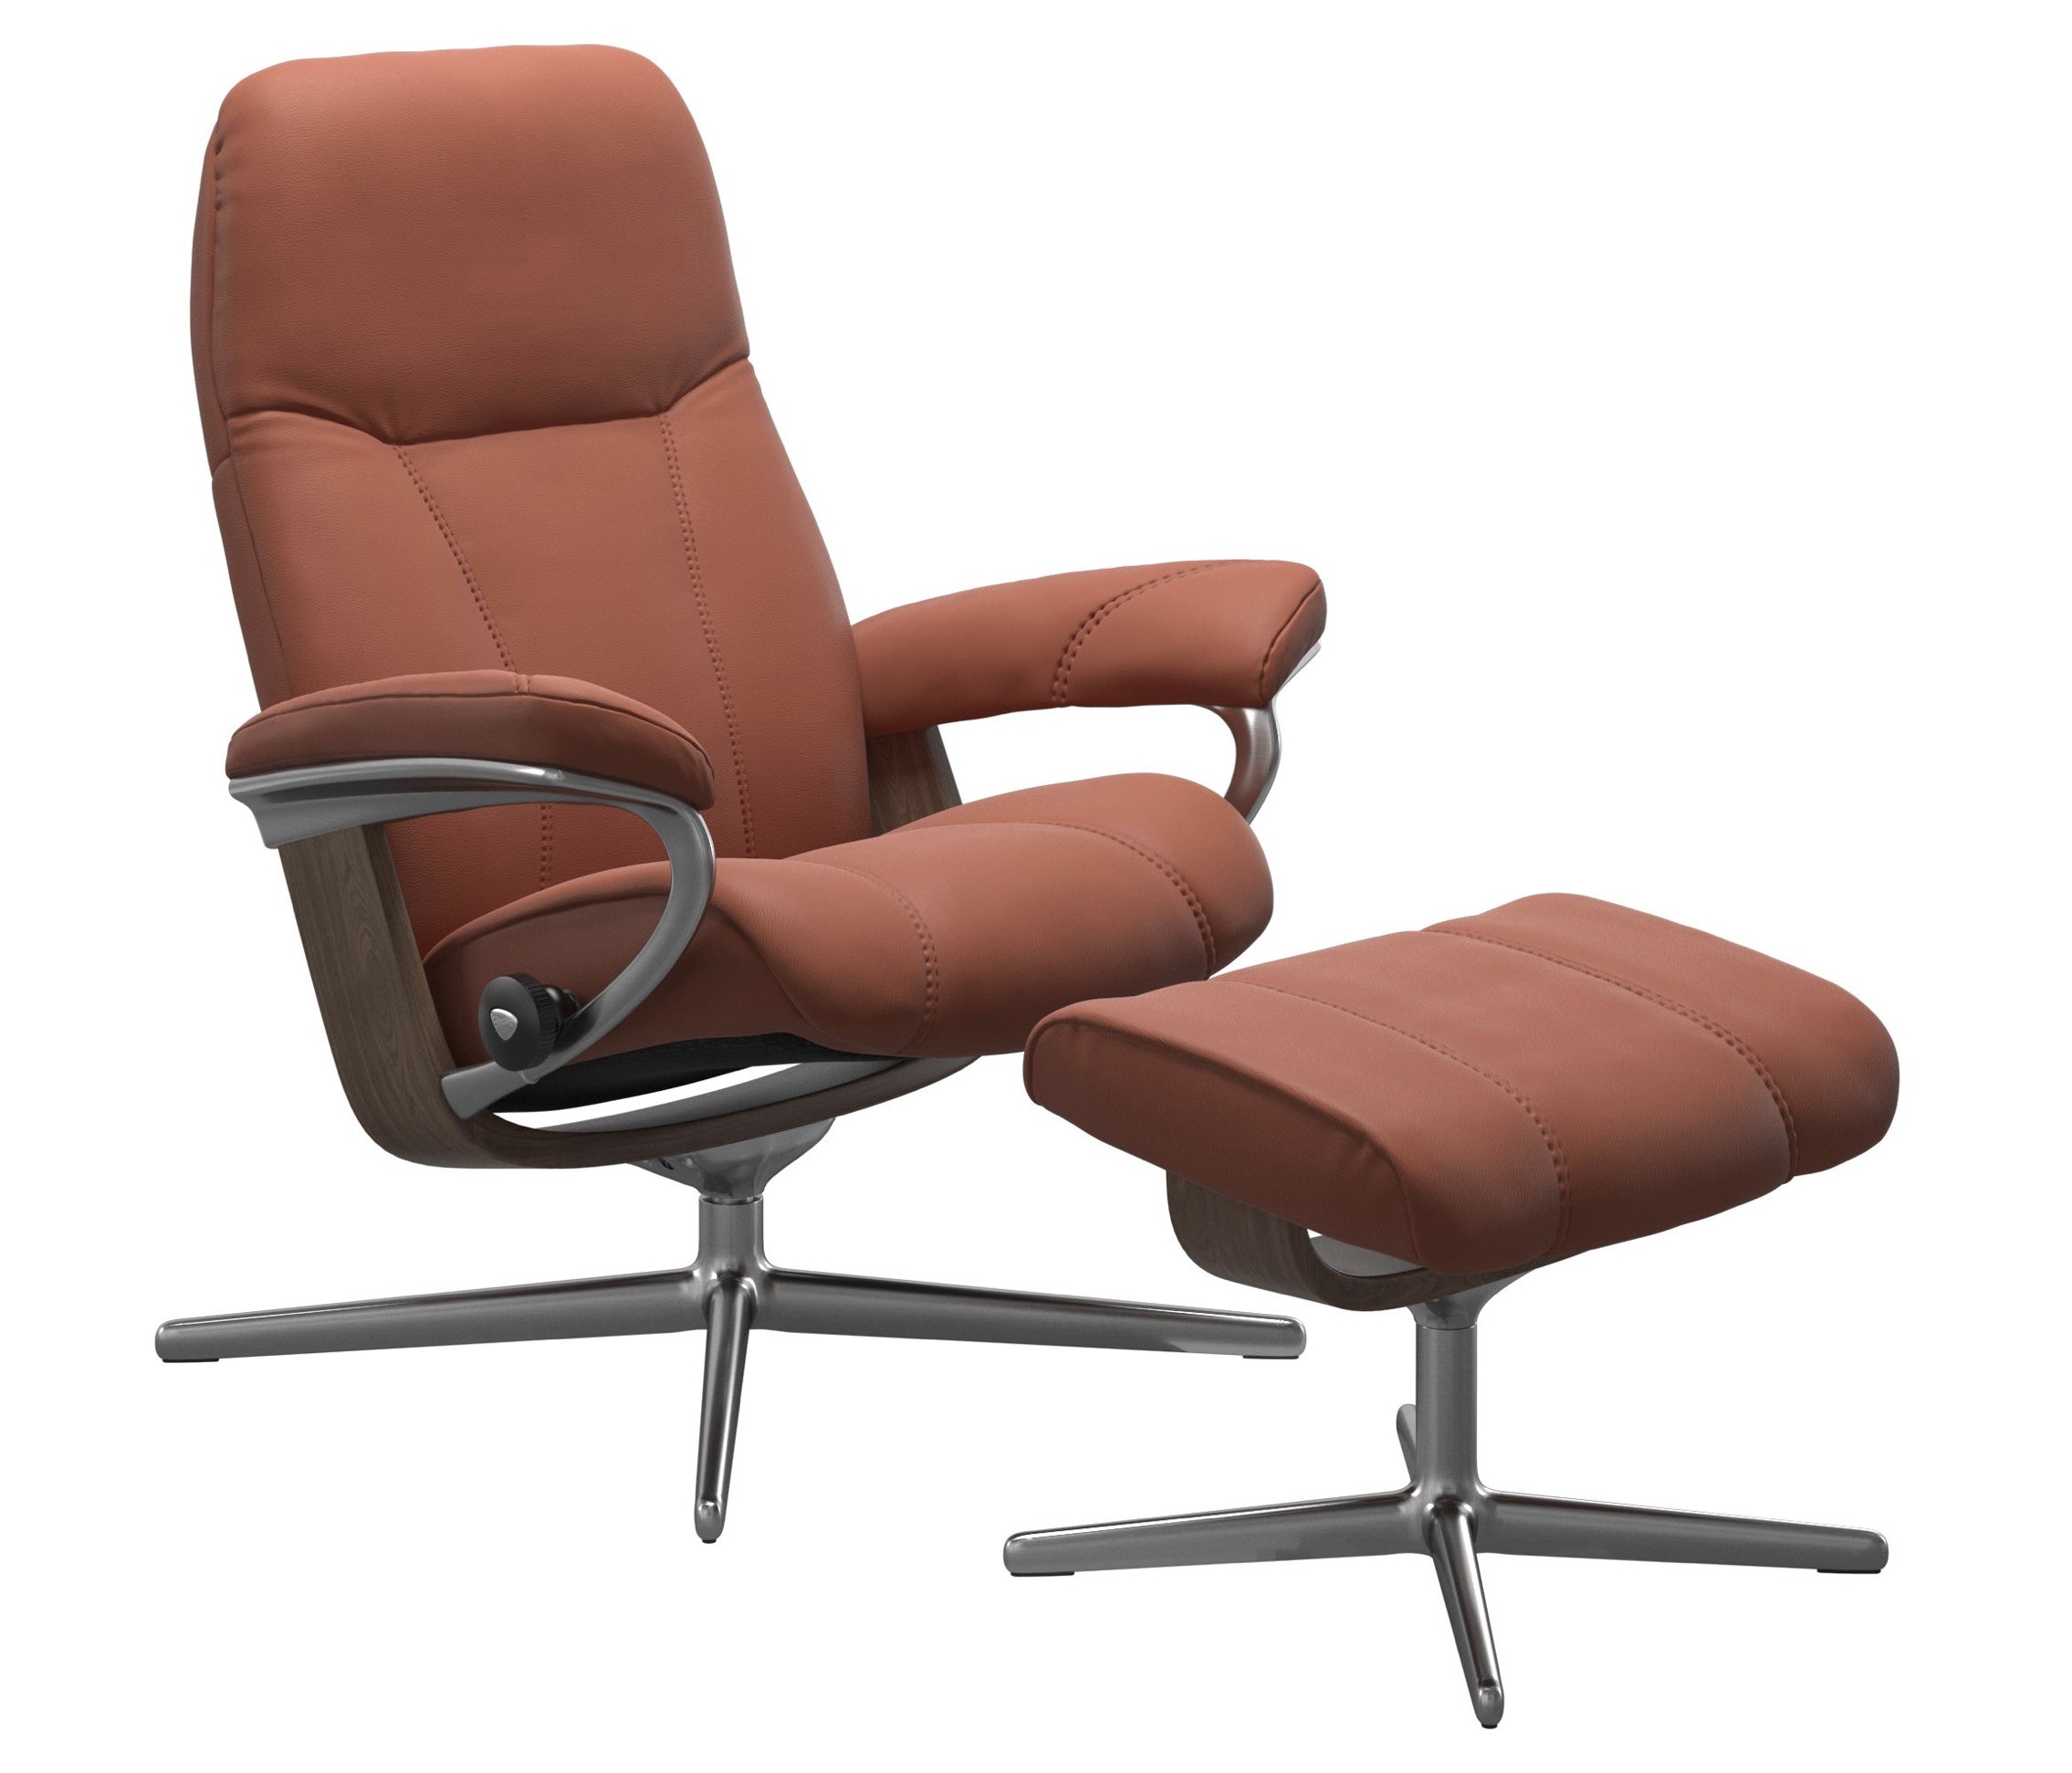 Stressless by Ekornes Furniture - Austin and Taylor - London, Ontario